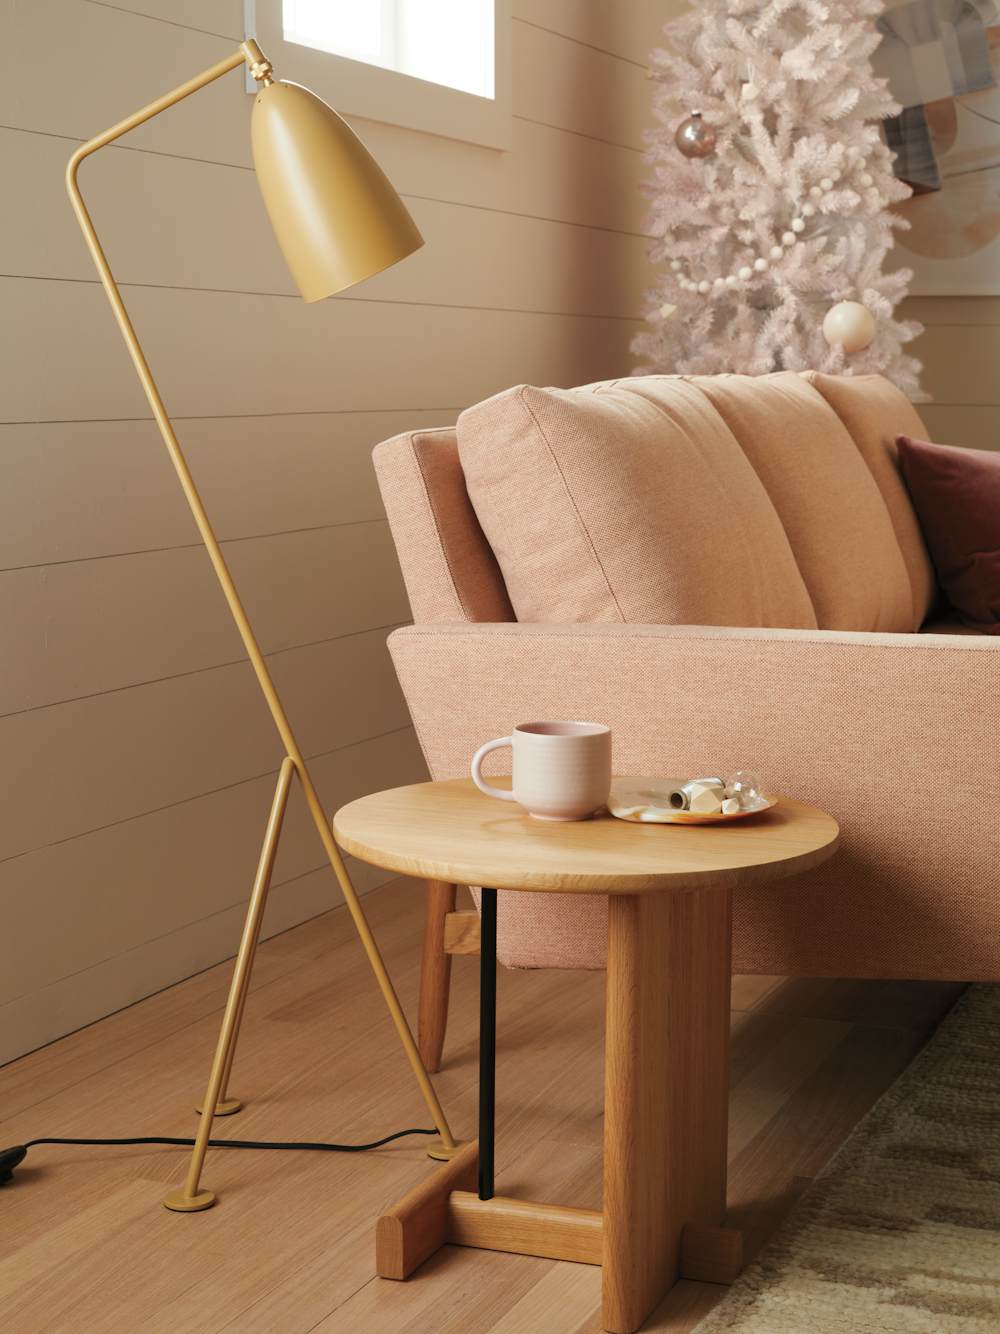 Raleigh Sofa, Grasshopper Floor Lamp and Koku Side Table - Holiday Version